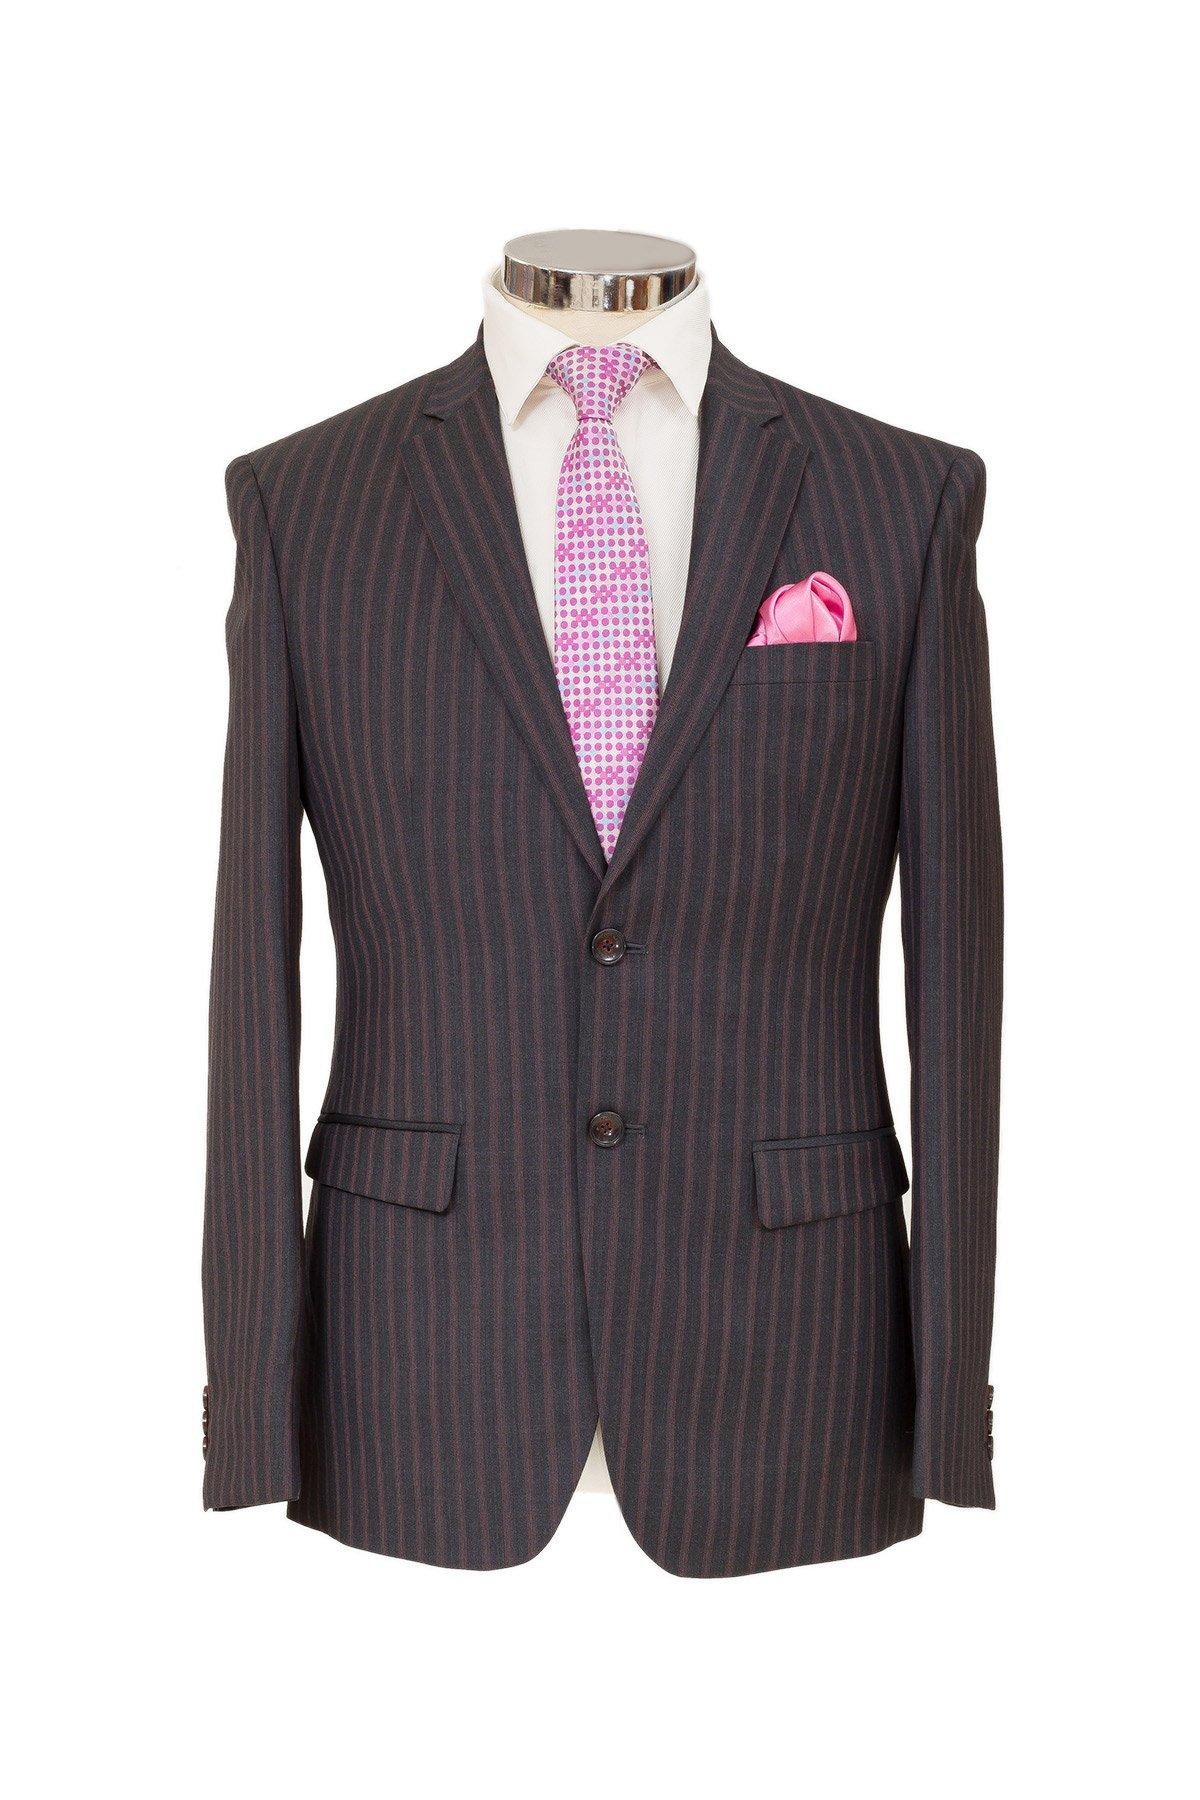 Men's 3 piece Checkered Business Suit - Grey - P N RAO